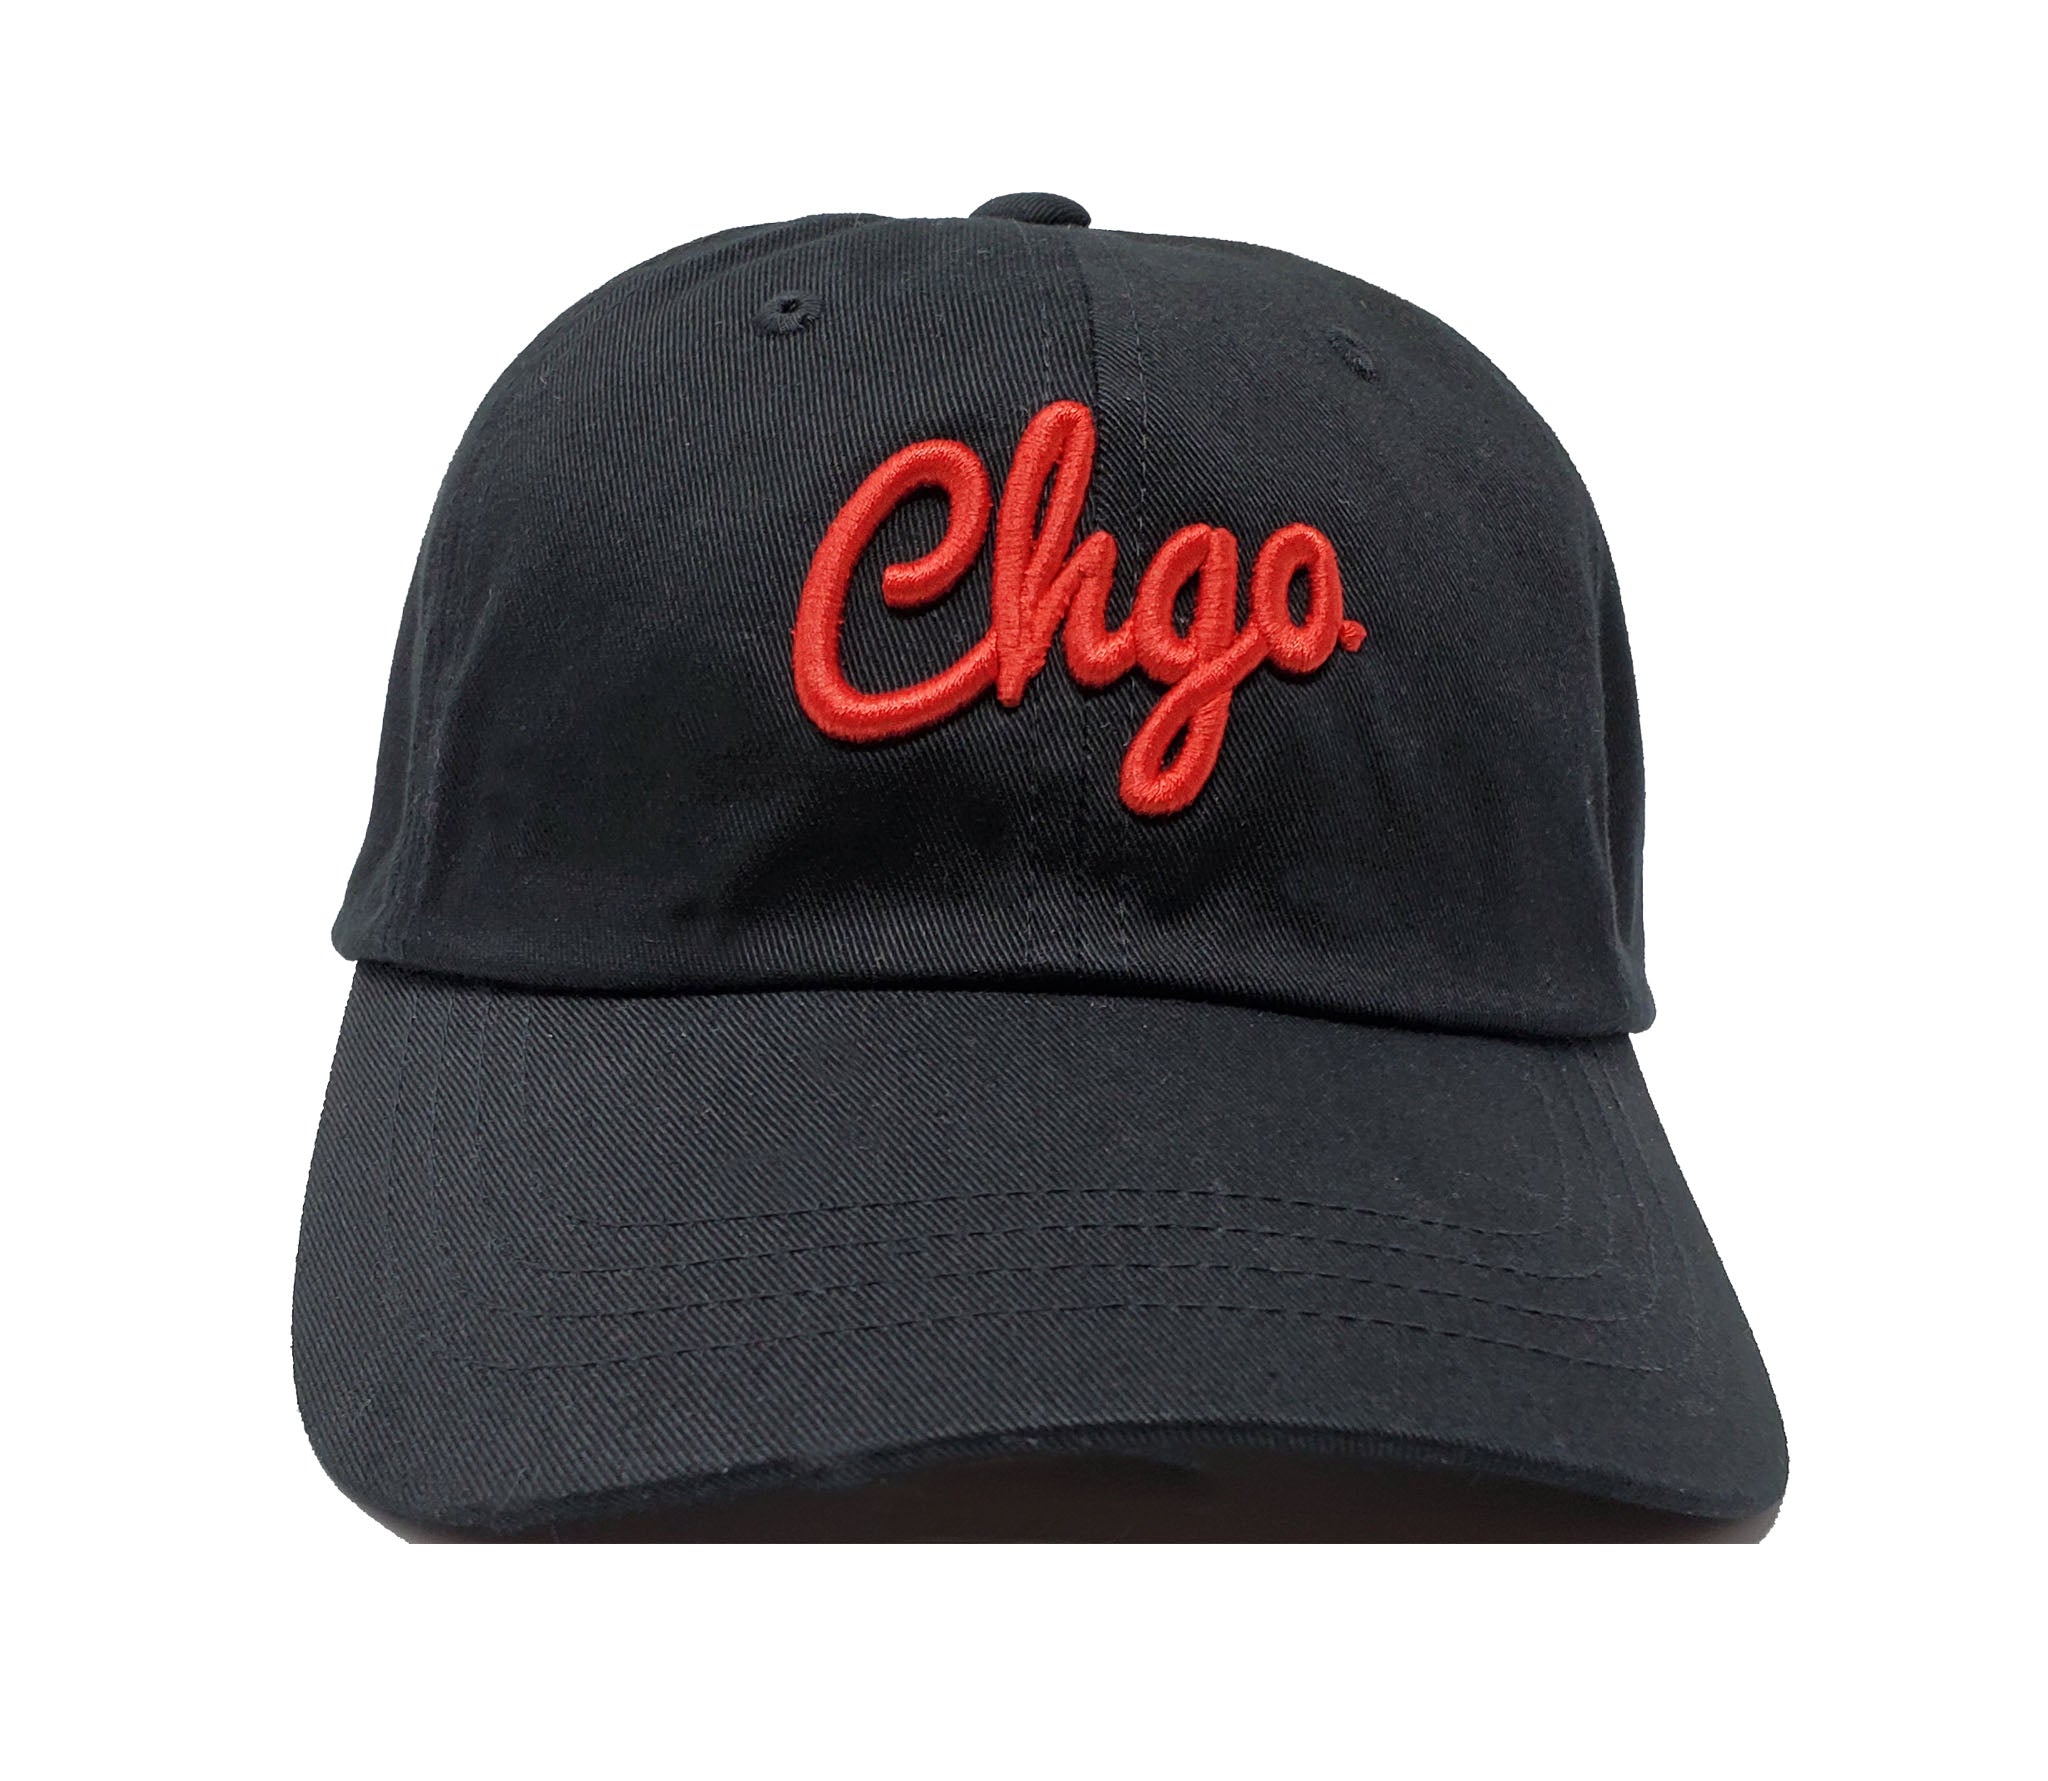 CHGO Black and Red Dad Cap